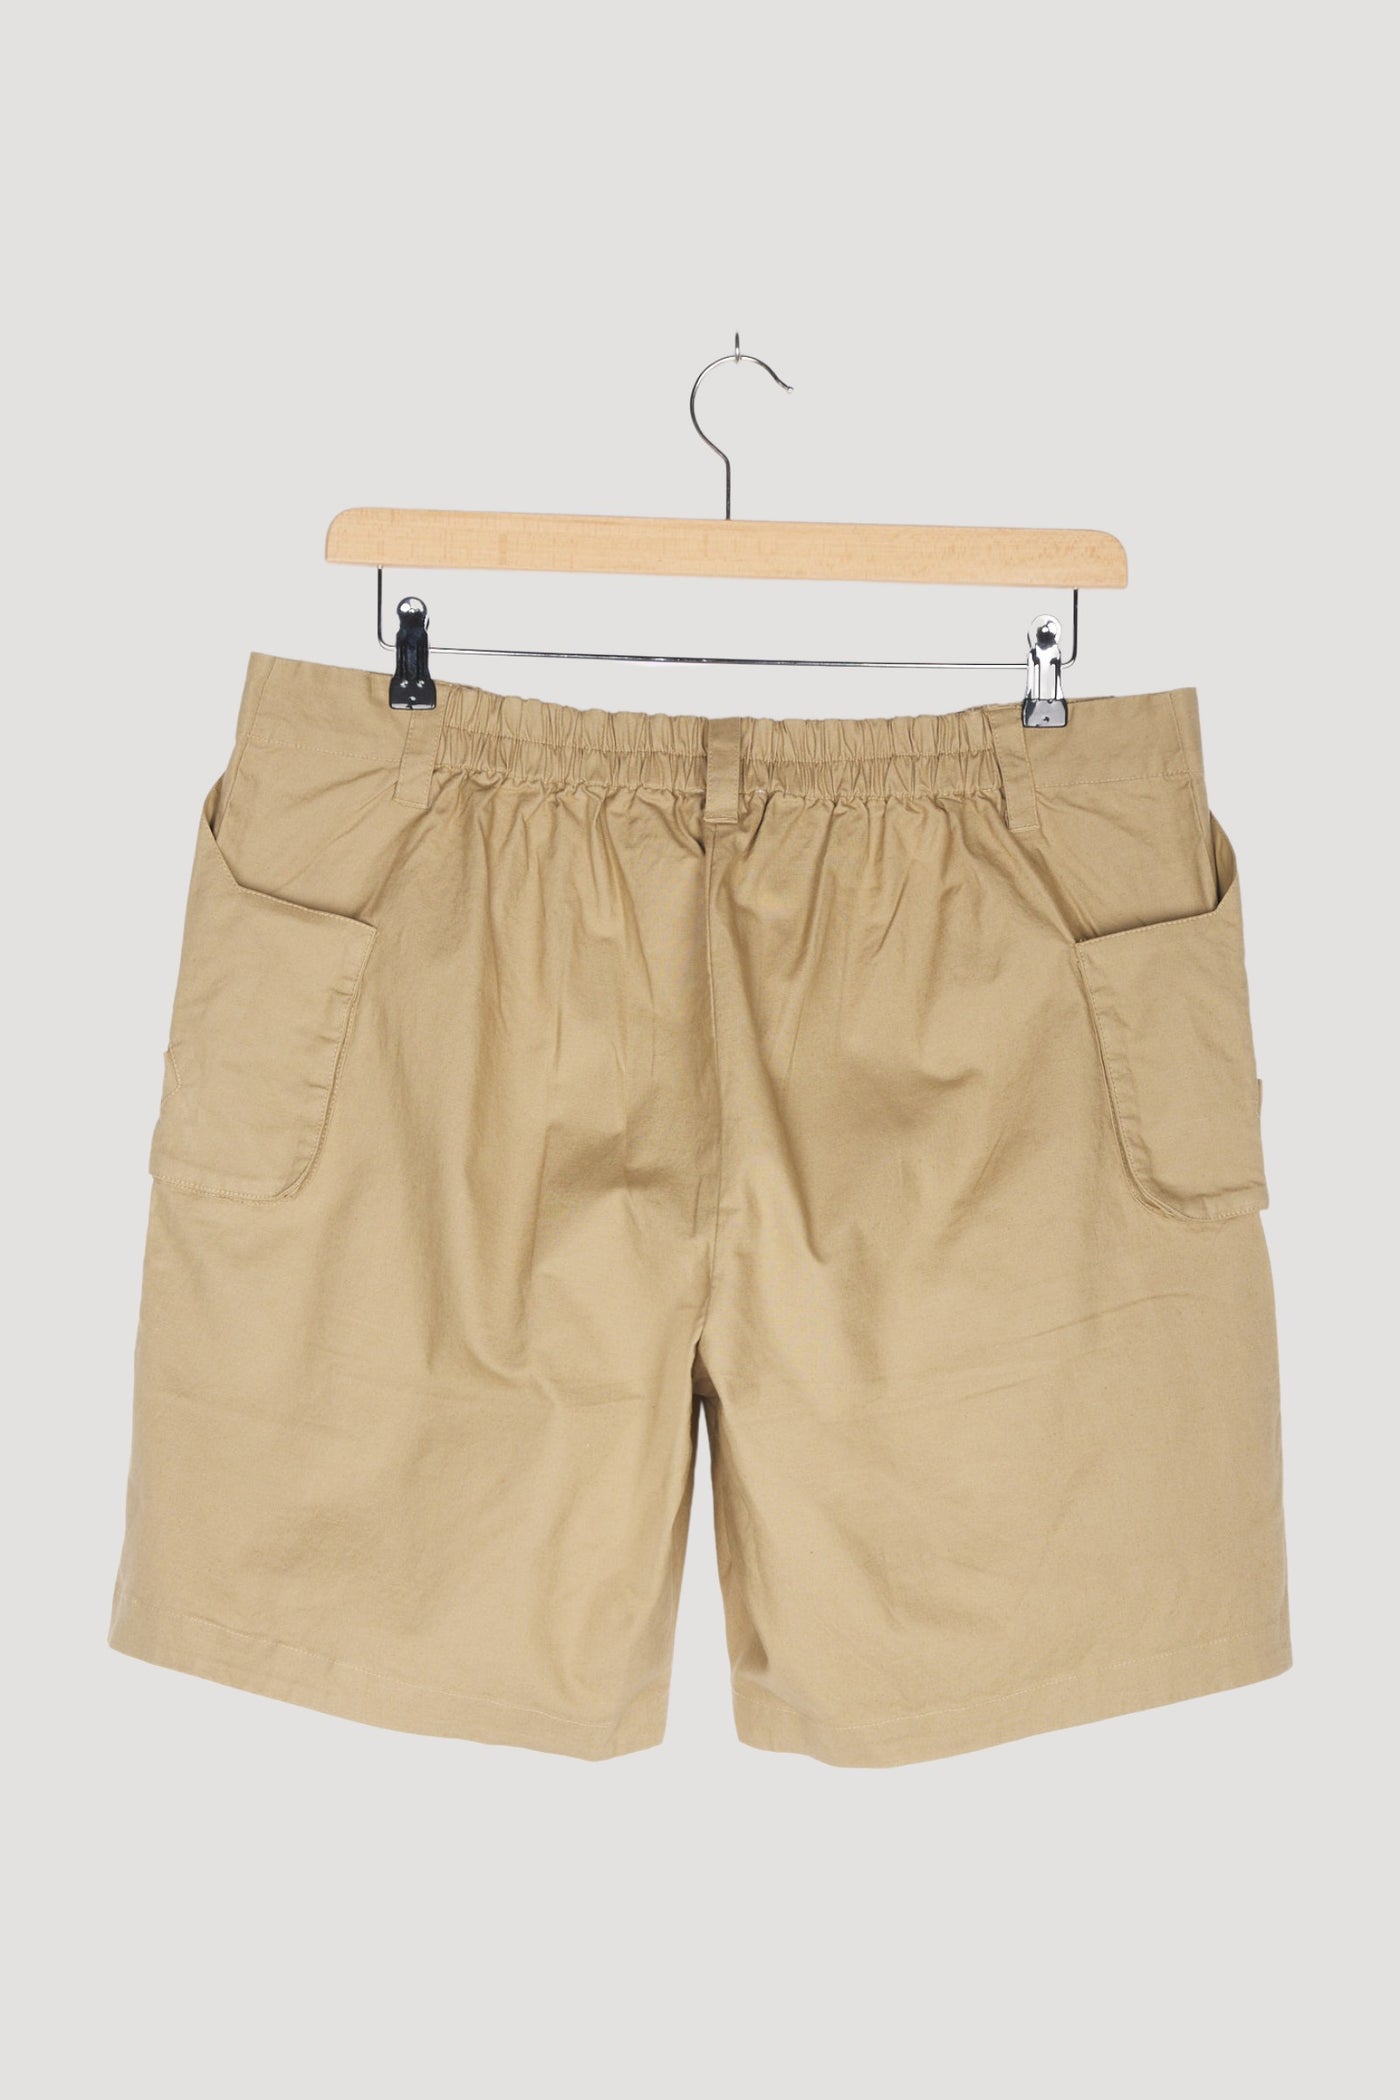 Secondhand Shorts